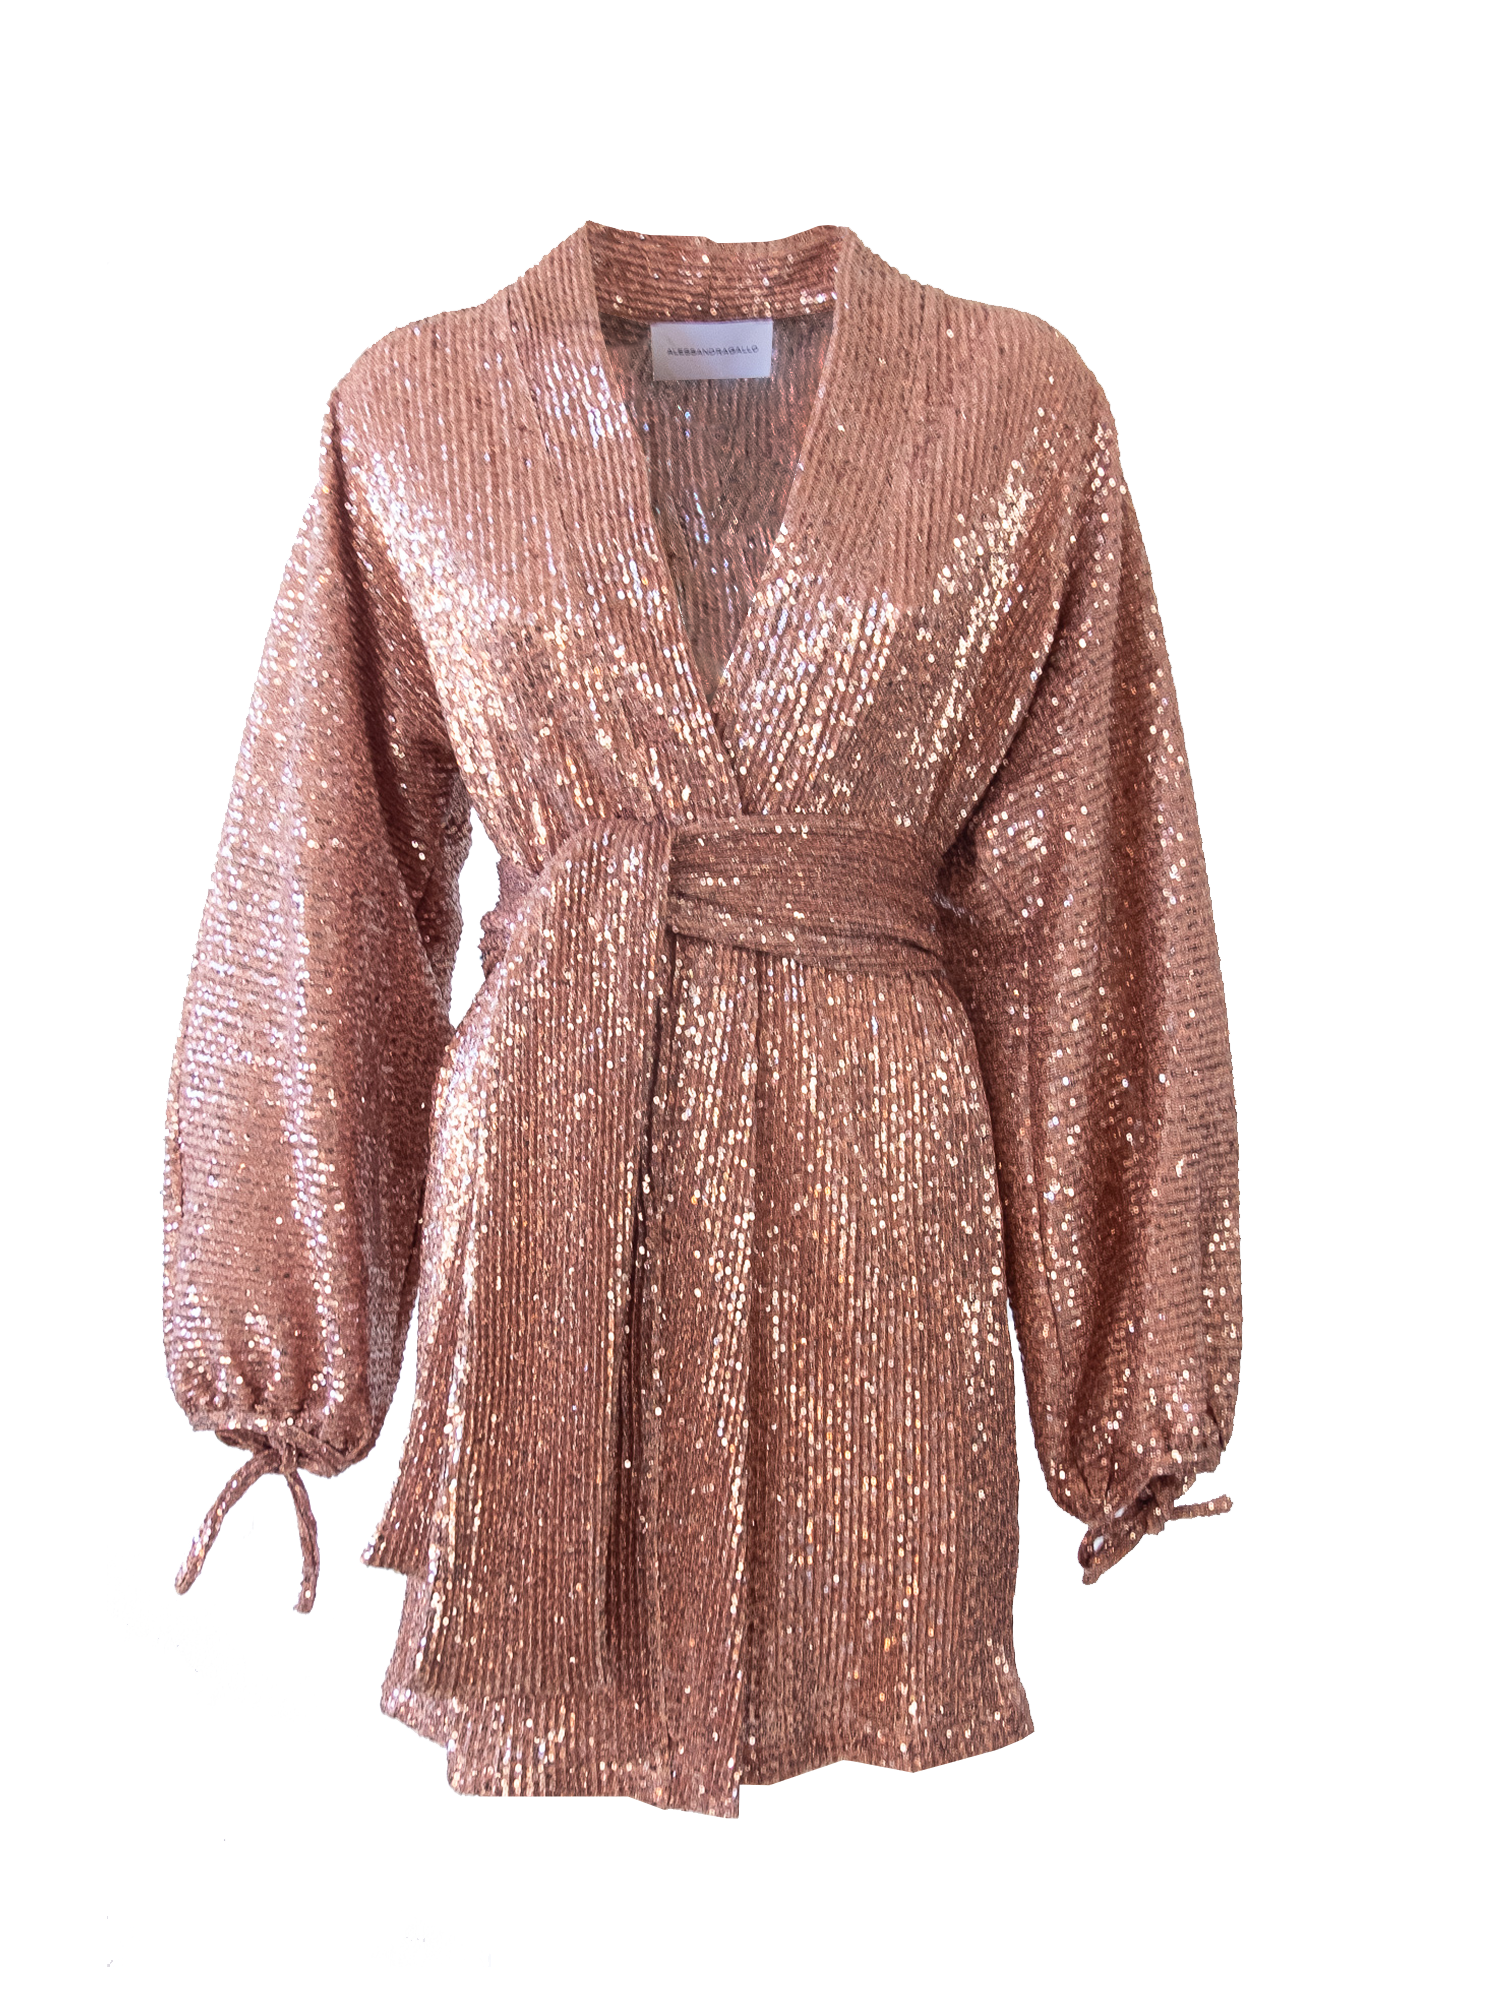 ELVIRA - short dress with wide sleeve and sash in pink sequin